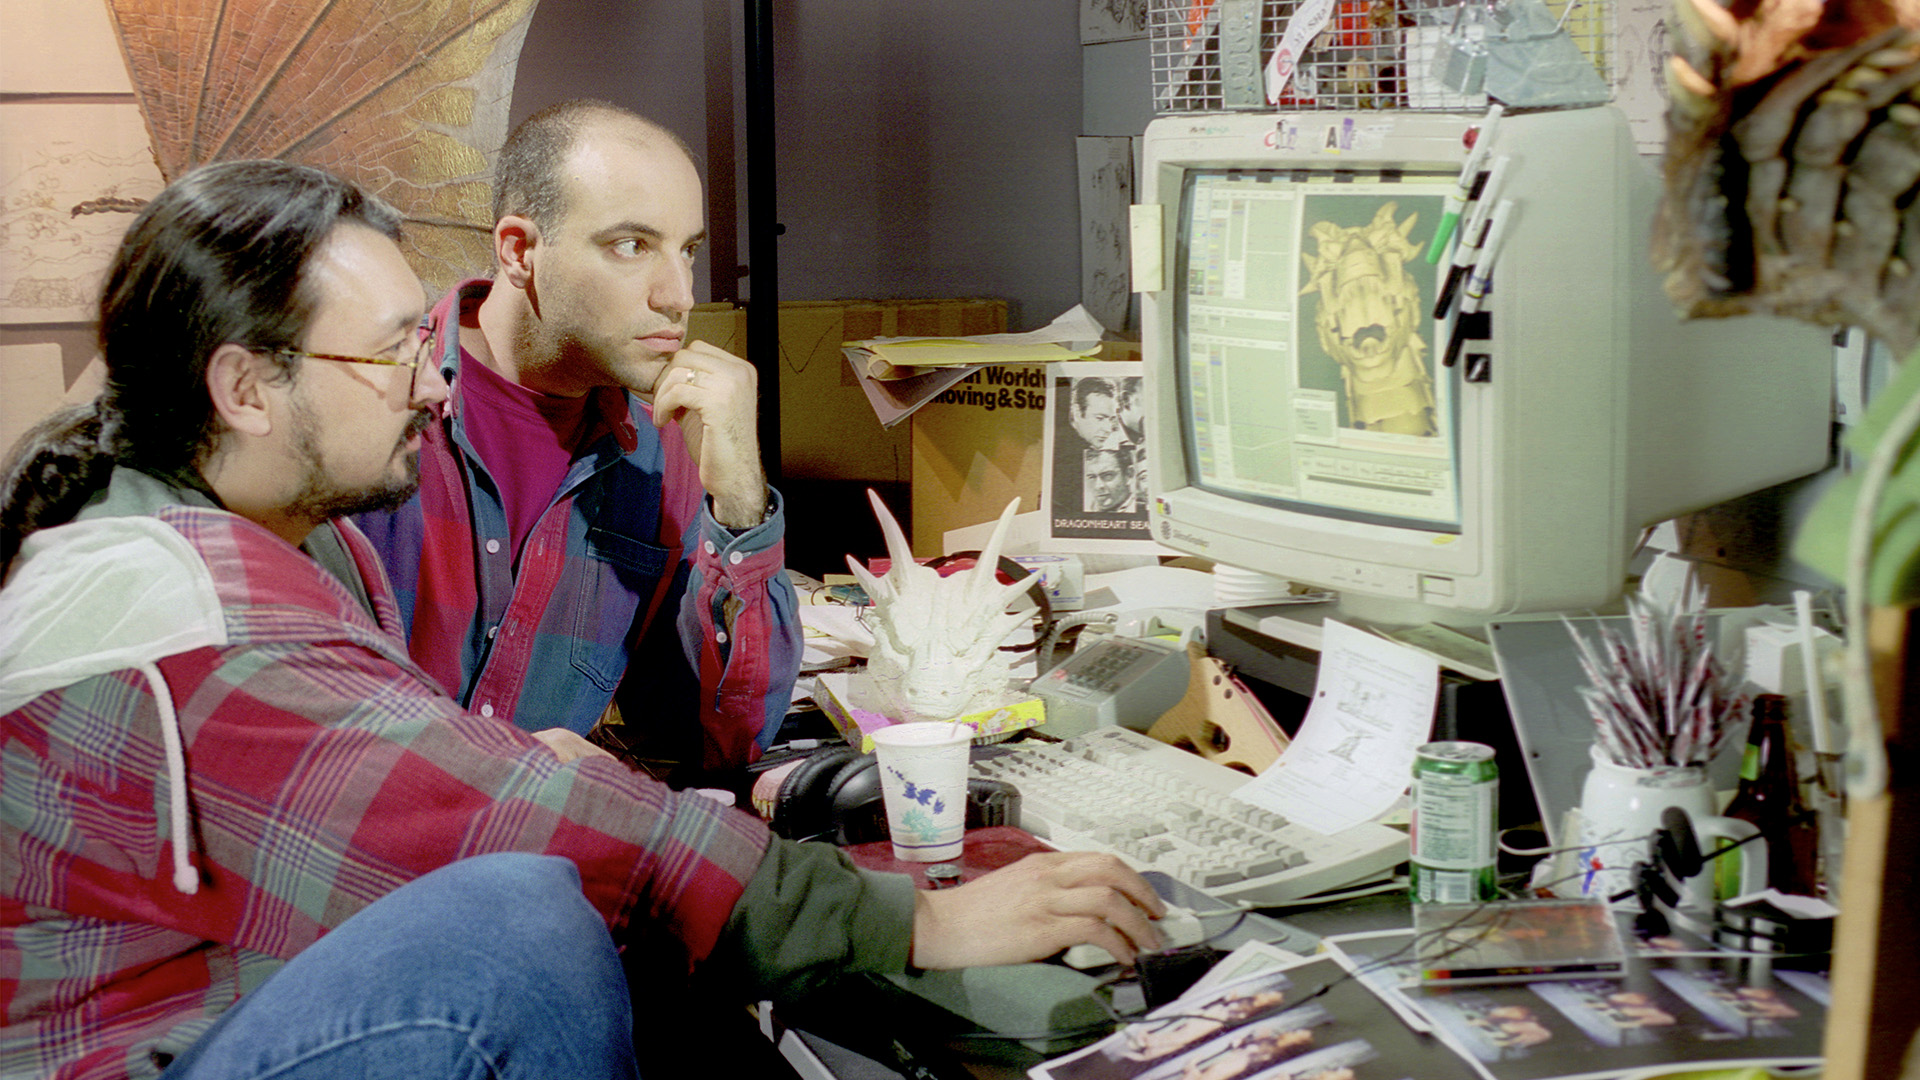 James Strauss and Paul Giacoppo from ILM work at a computer.